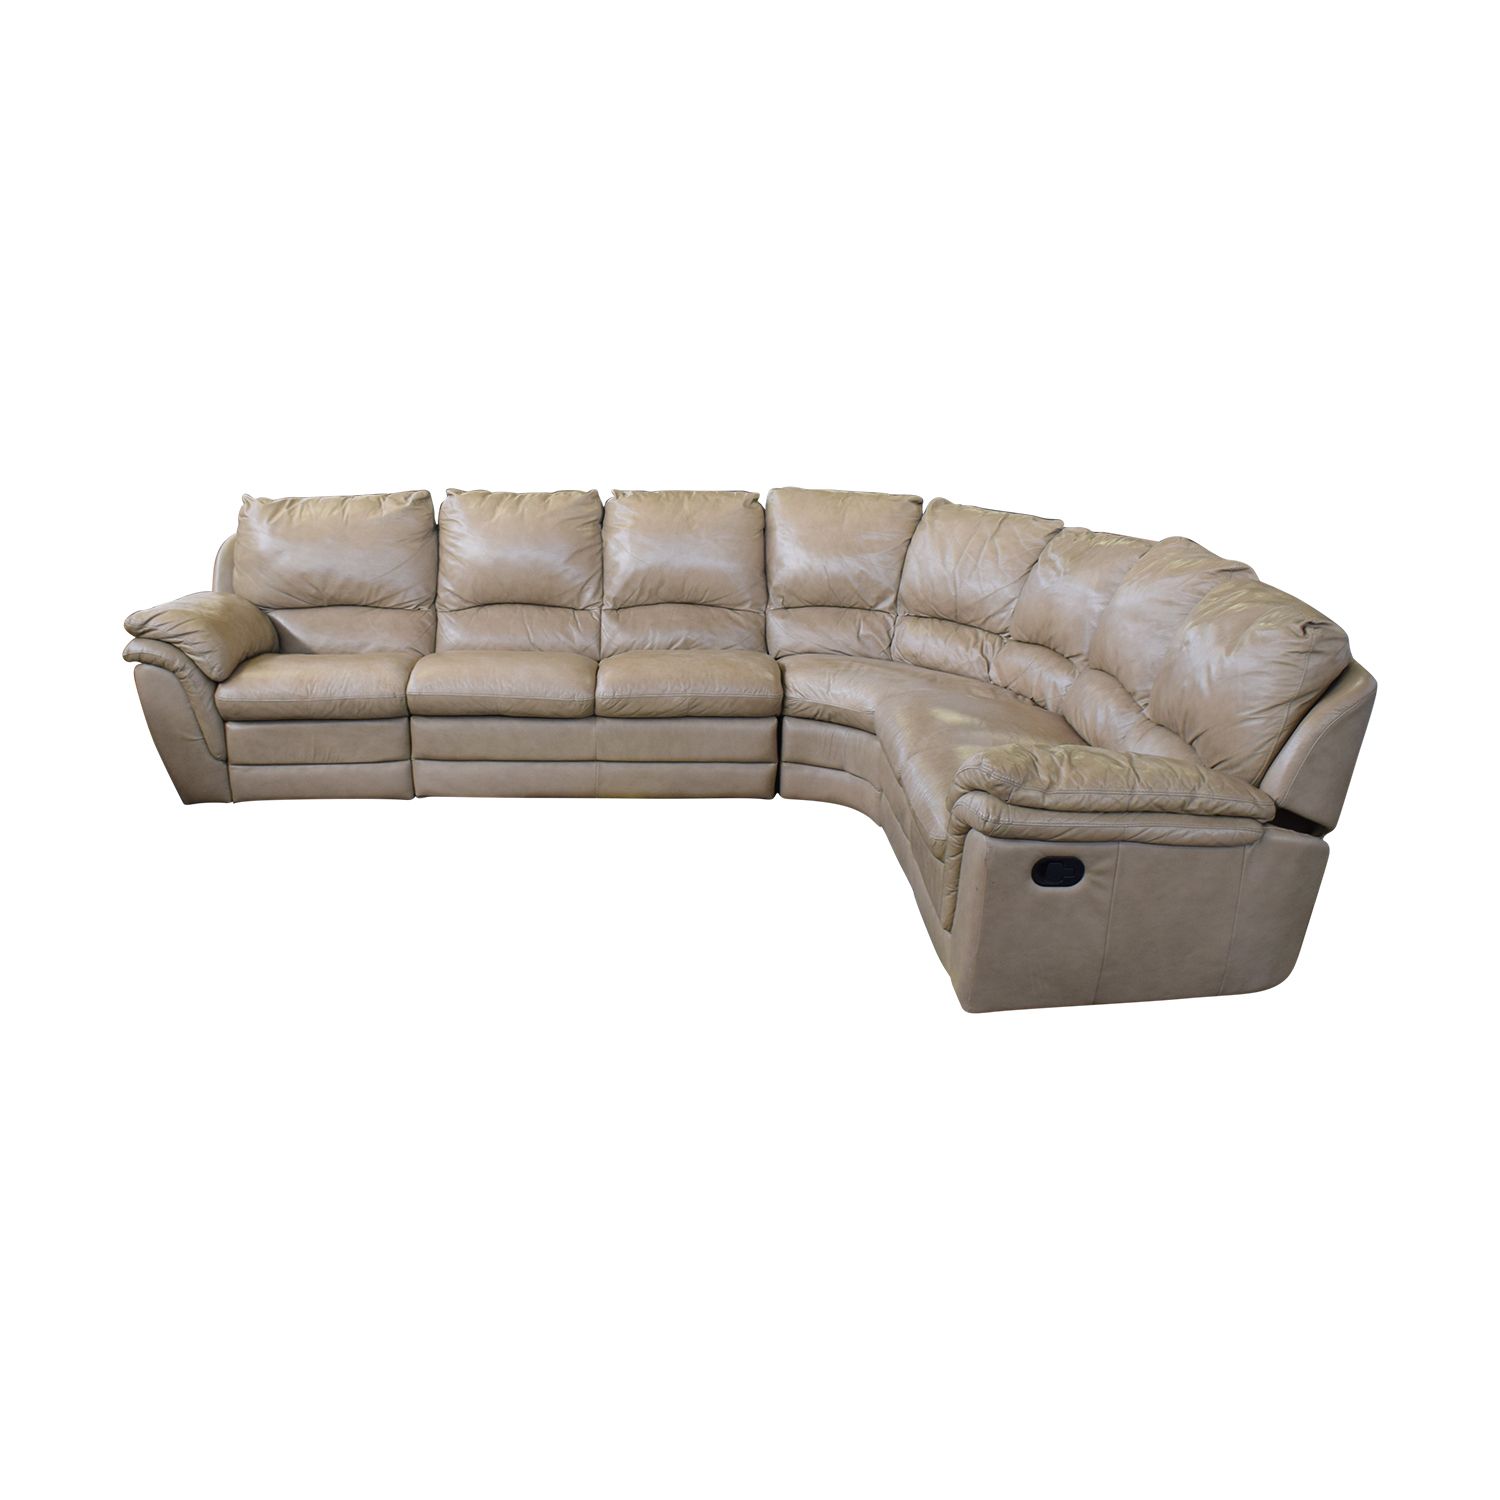 90% Off – Beige L Shaped Sectional / Sofas Within Beige L Shaped Sectional Sofas (Gallery 18 of 20)